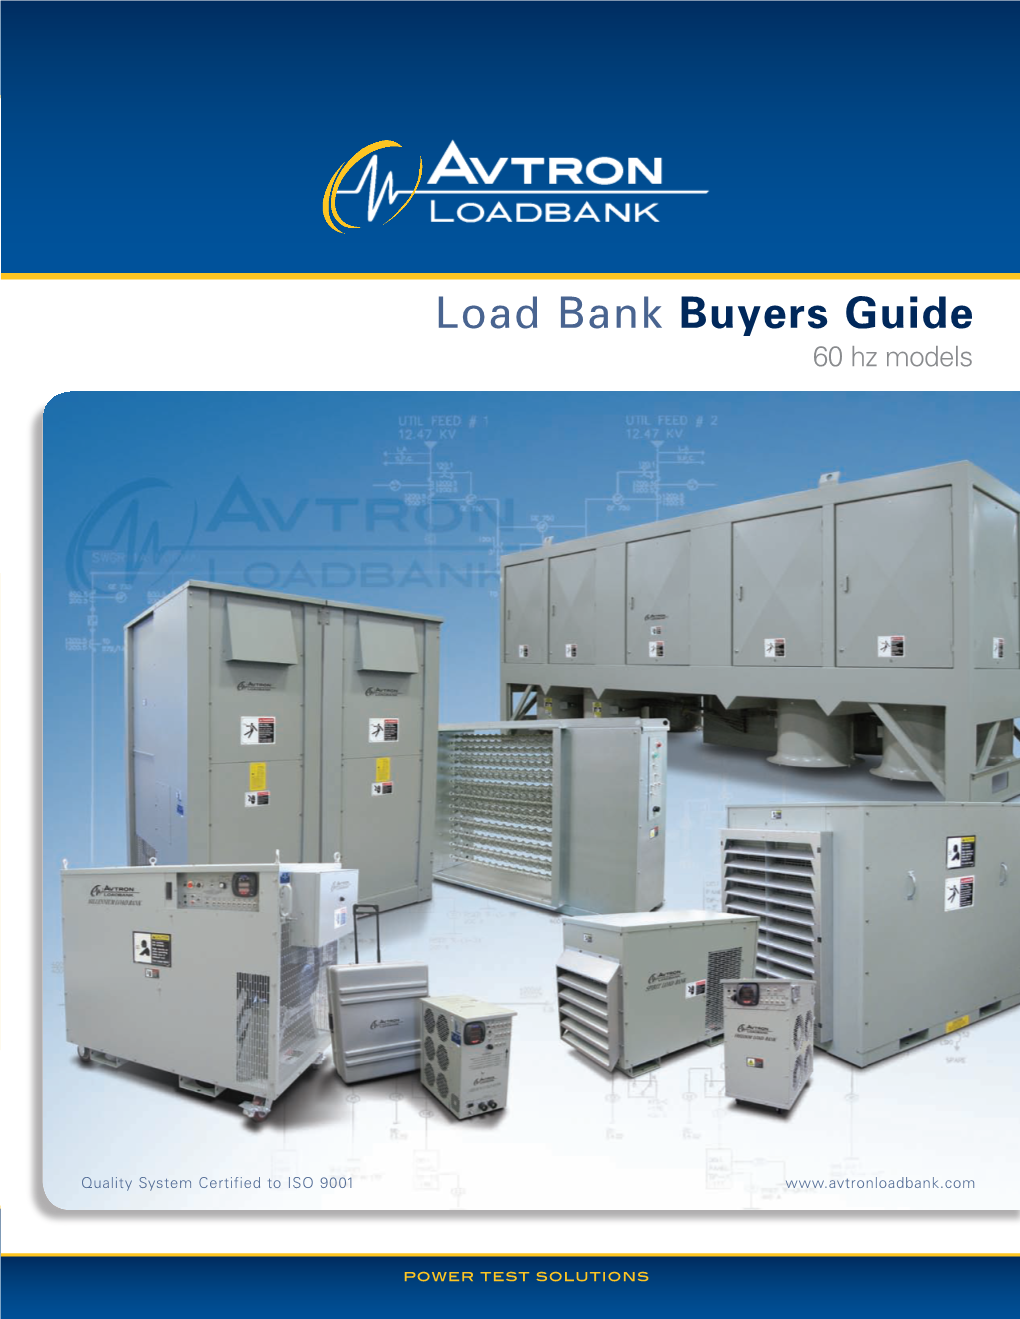 Load Bank Buyers Guide When Rating Load Bank Capacities for Special Applications, Refer to the Wiring 60 Hz Models Diagrams Shown on Right